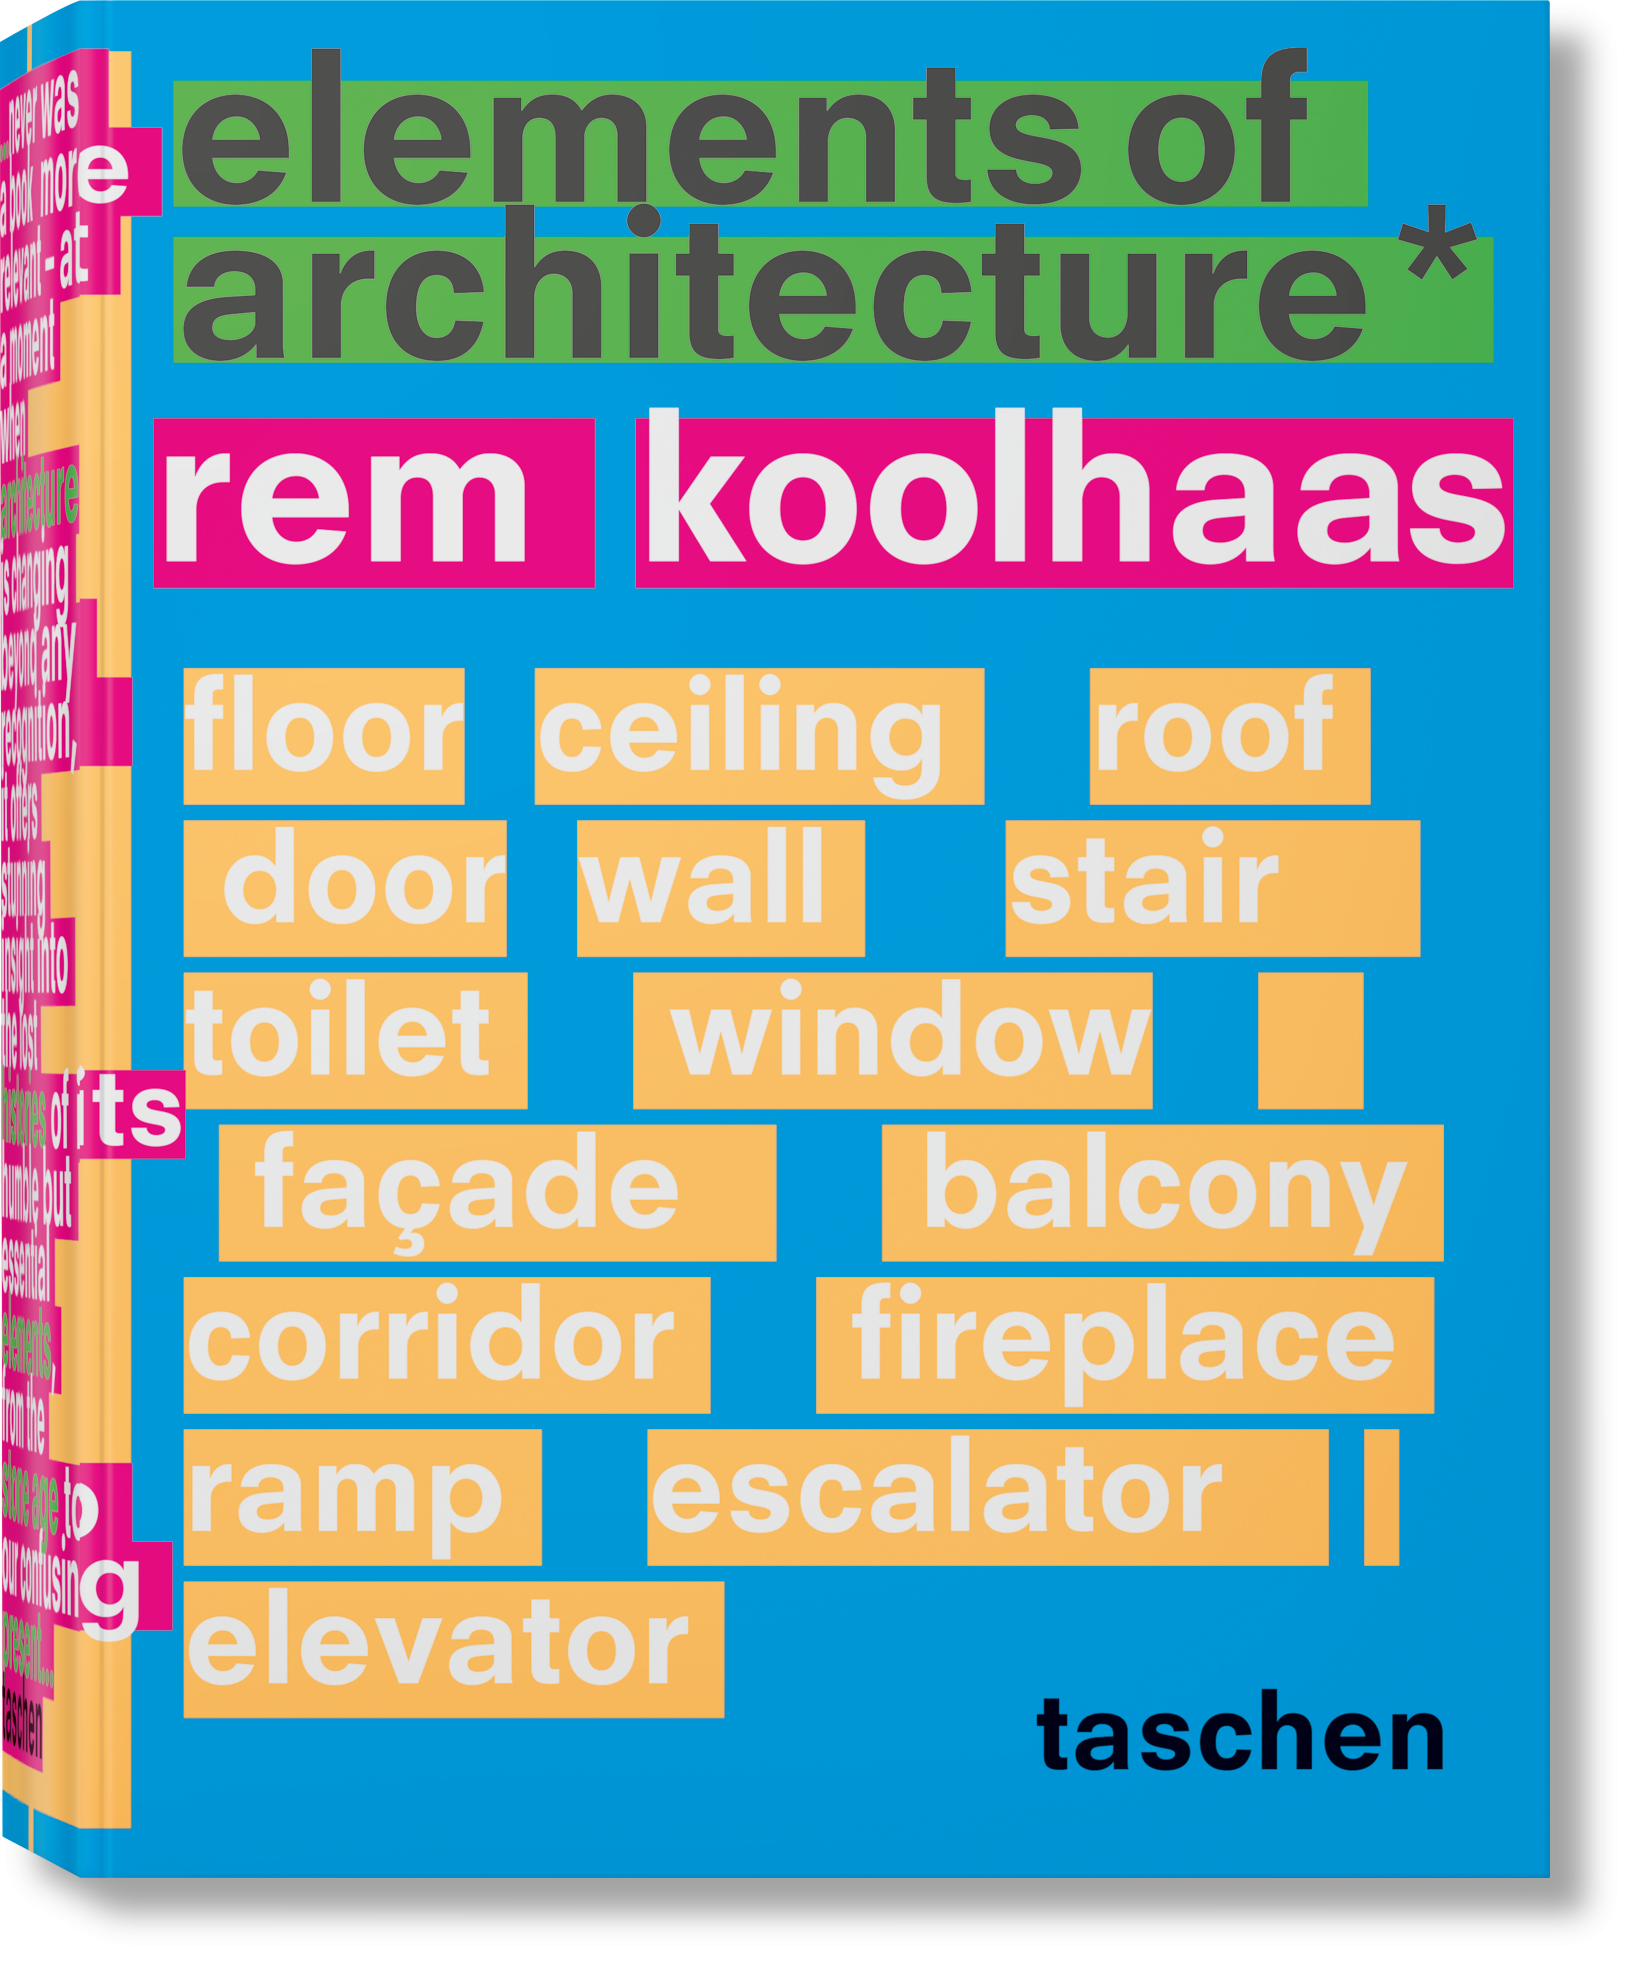 TASCHEN Books: Koolhaas. Elements of Architecture